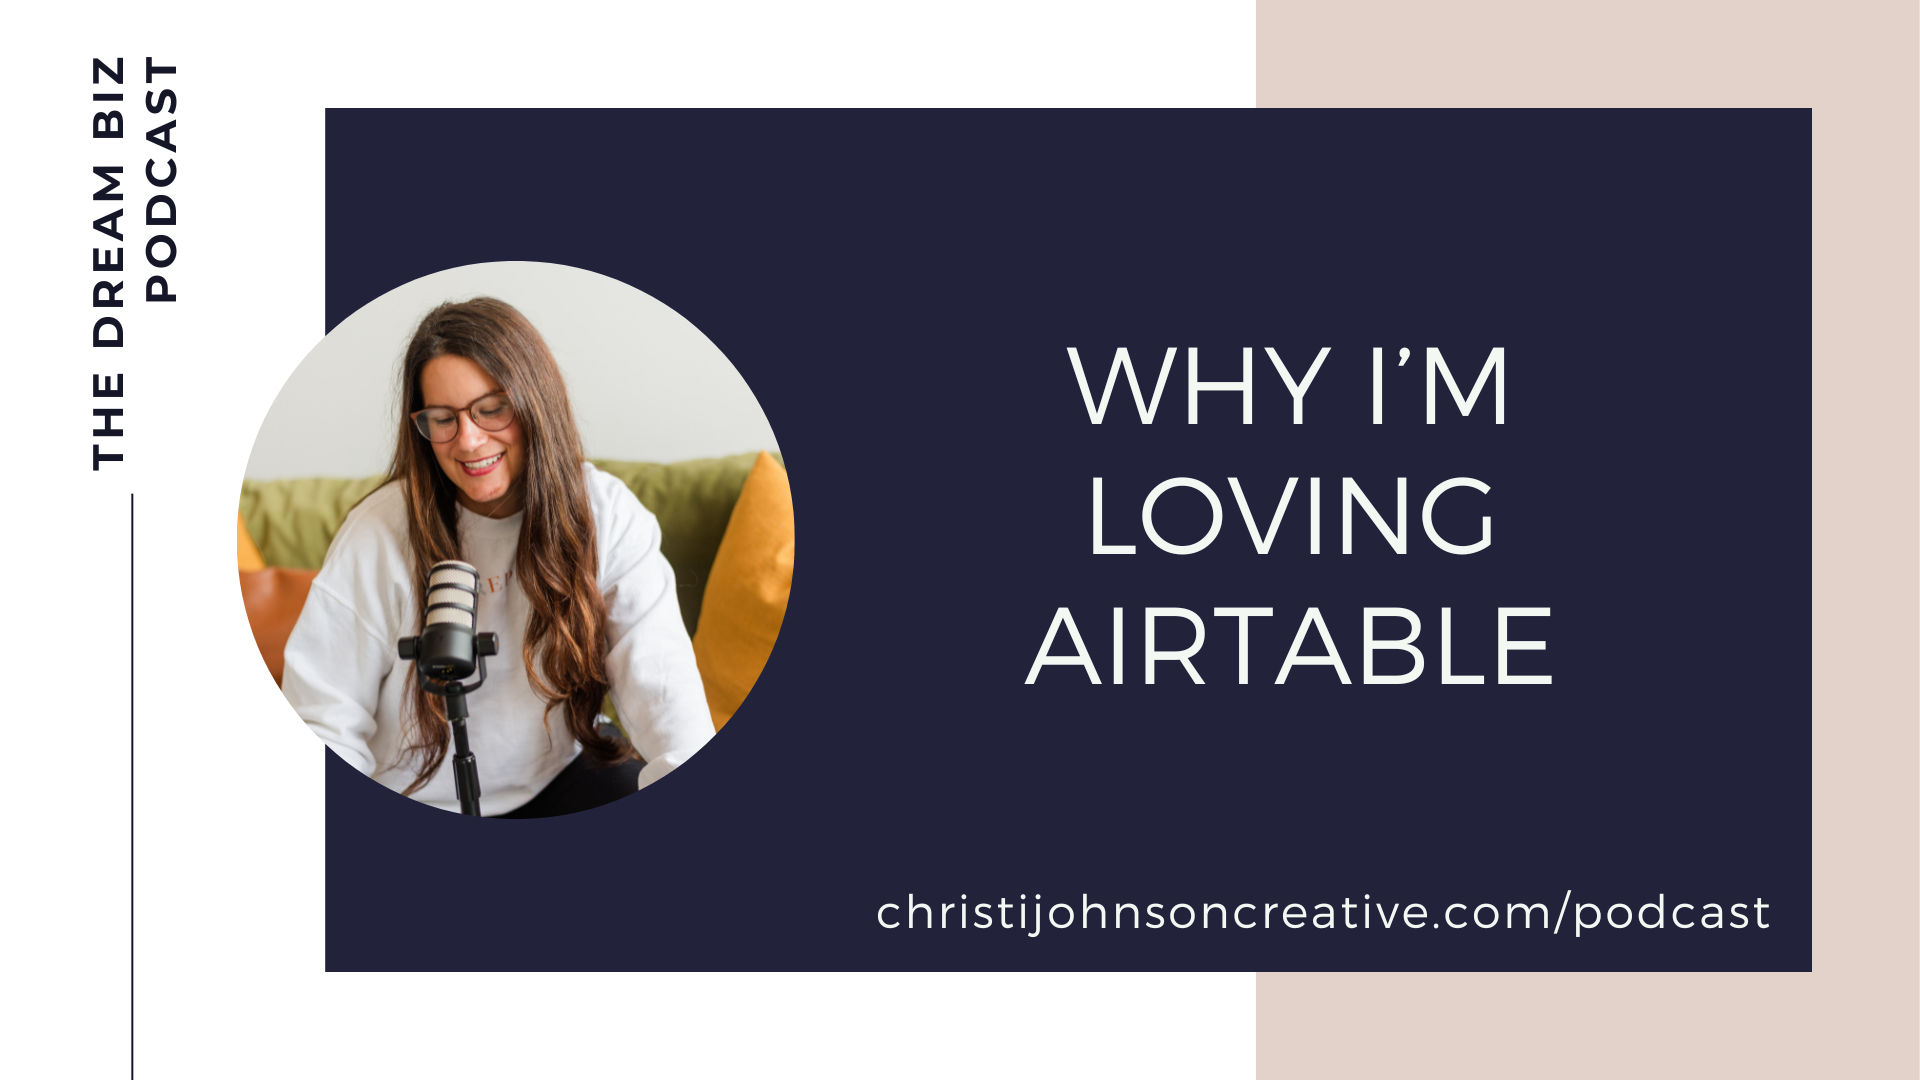 Why I'm Loving Airtable is written in white text on a dark purple background. Christi is sitting on a couch recording her podcast wearing a white sweatshirt.